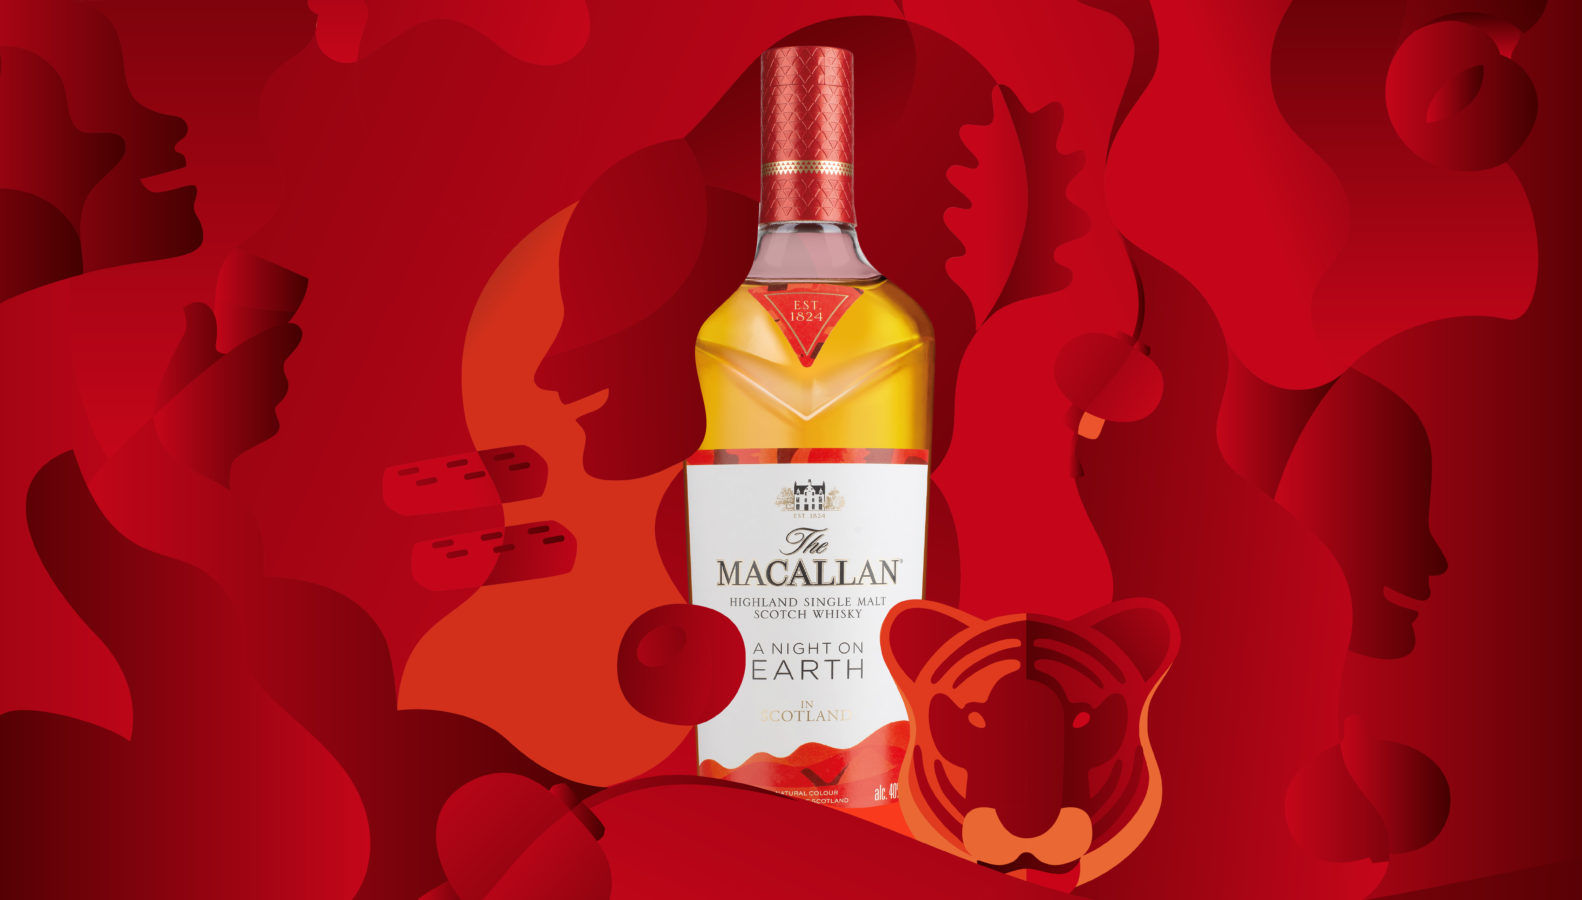 Celebrate ‘A Night On Earth In Scotland’ with The Macallan’s limited edition gifting series